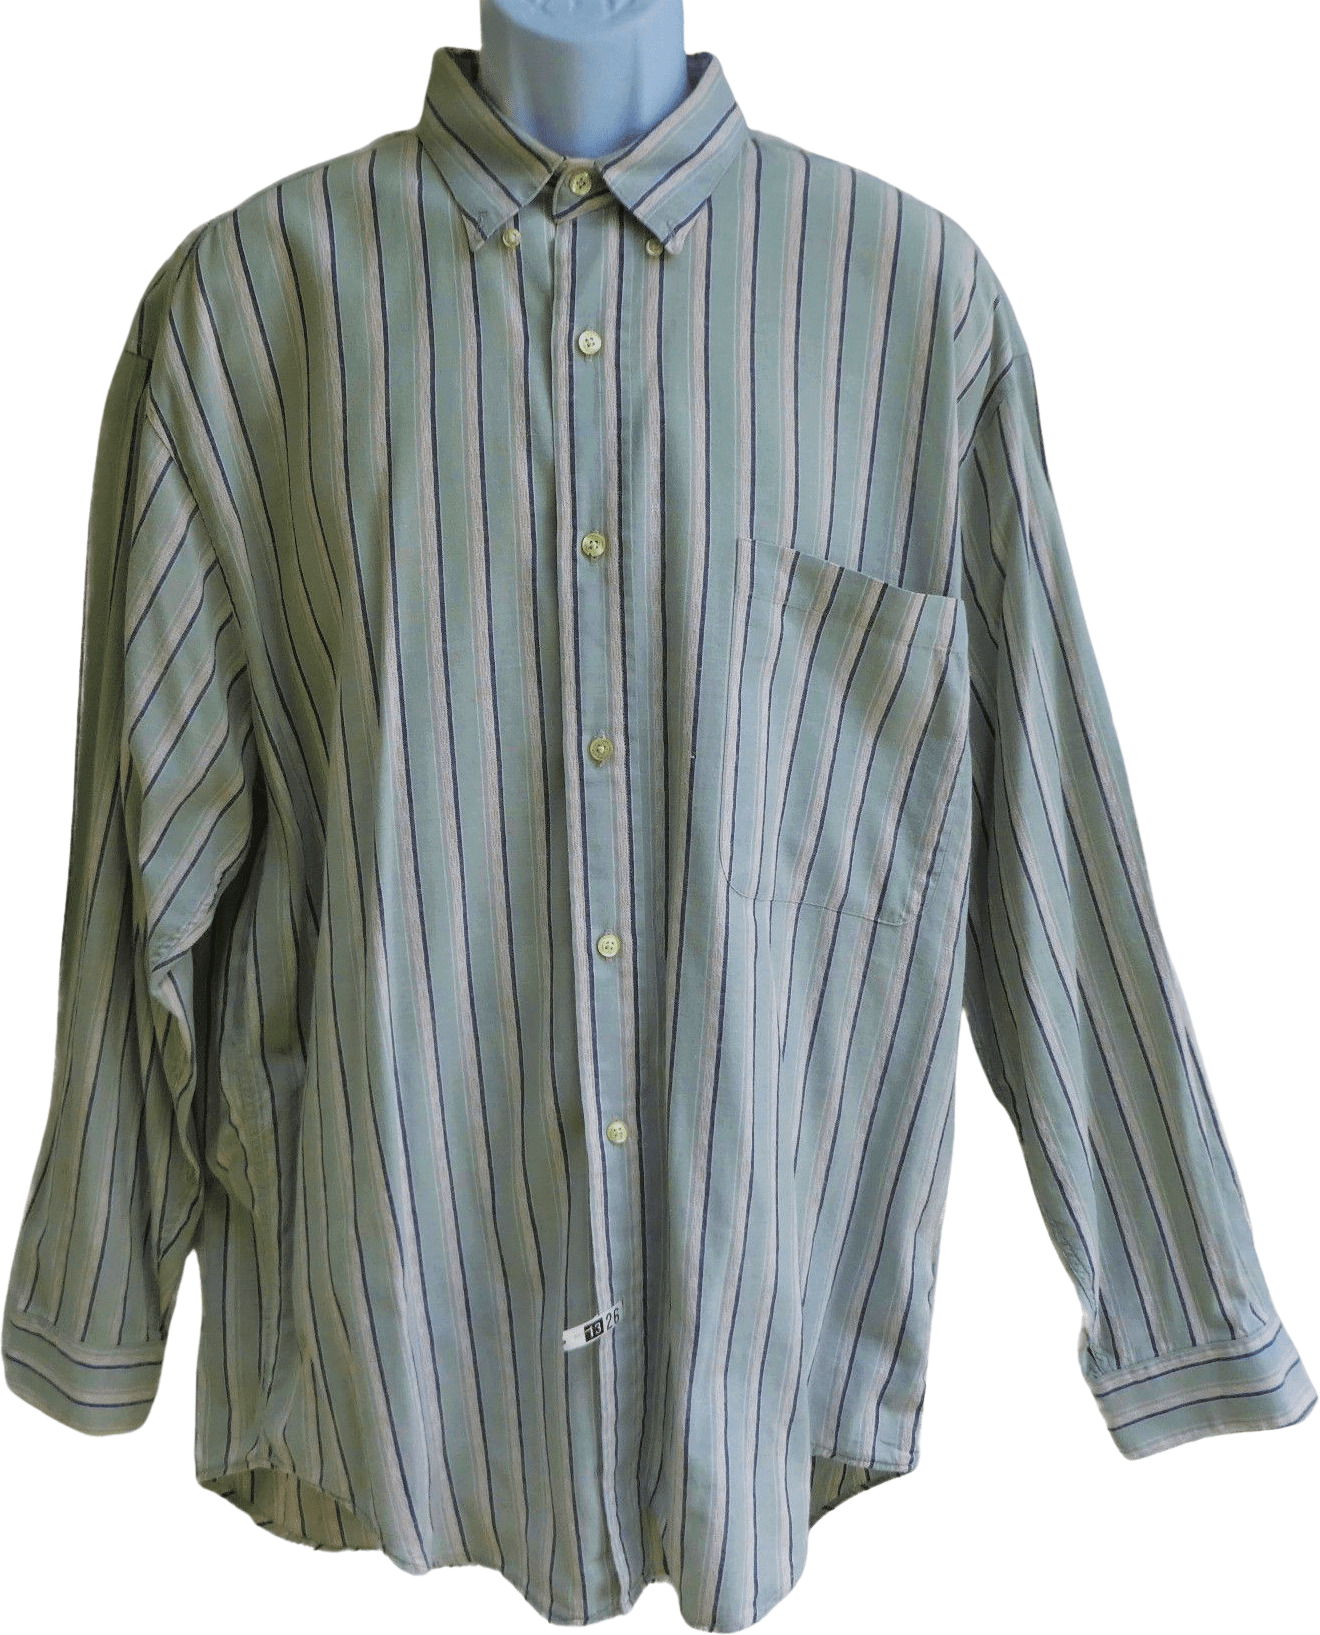 Vintage 80s/90s Stripe Shirt Long Sleeve Cotton Usa Mens Large By